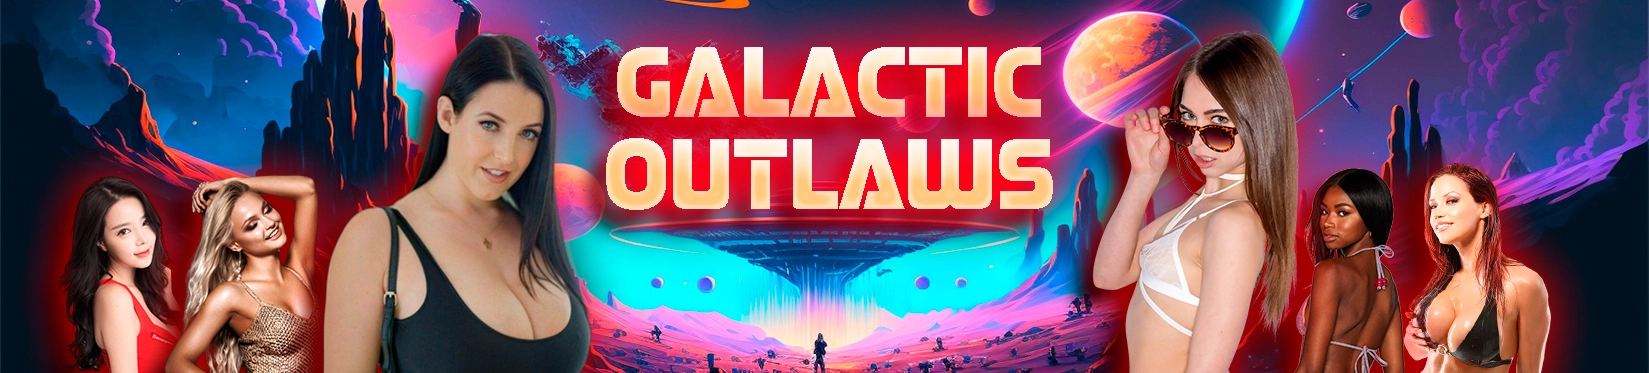 Galactic Outlaws main image